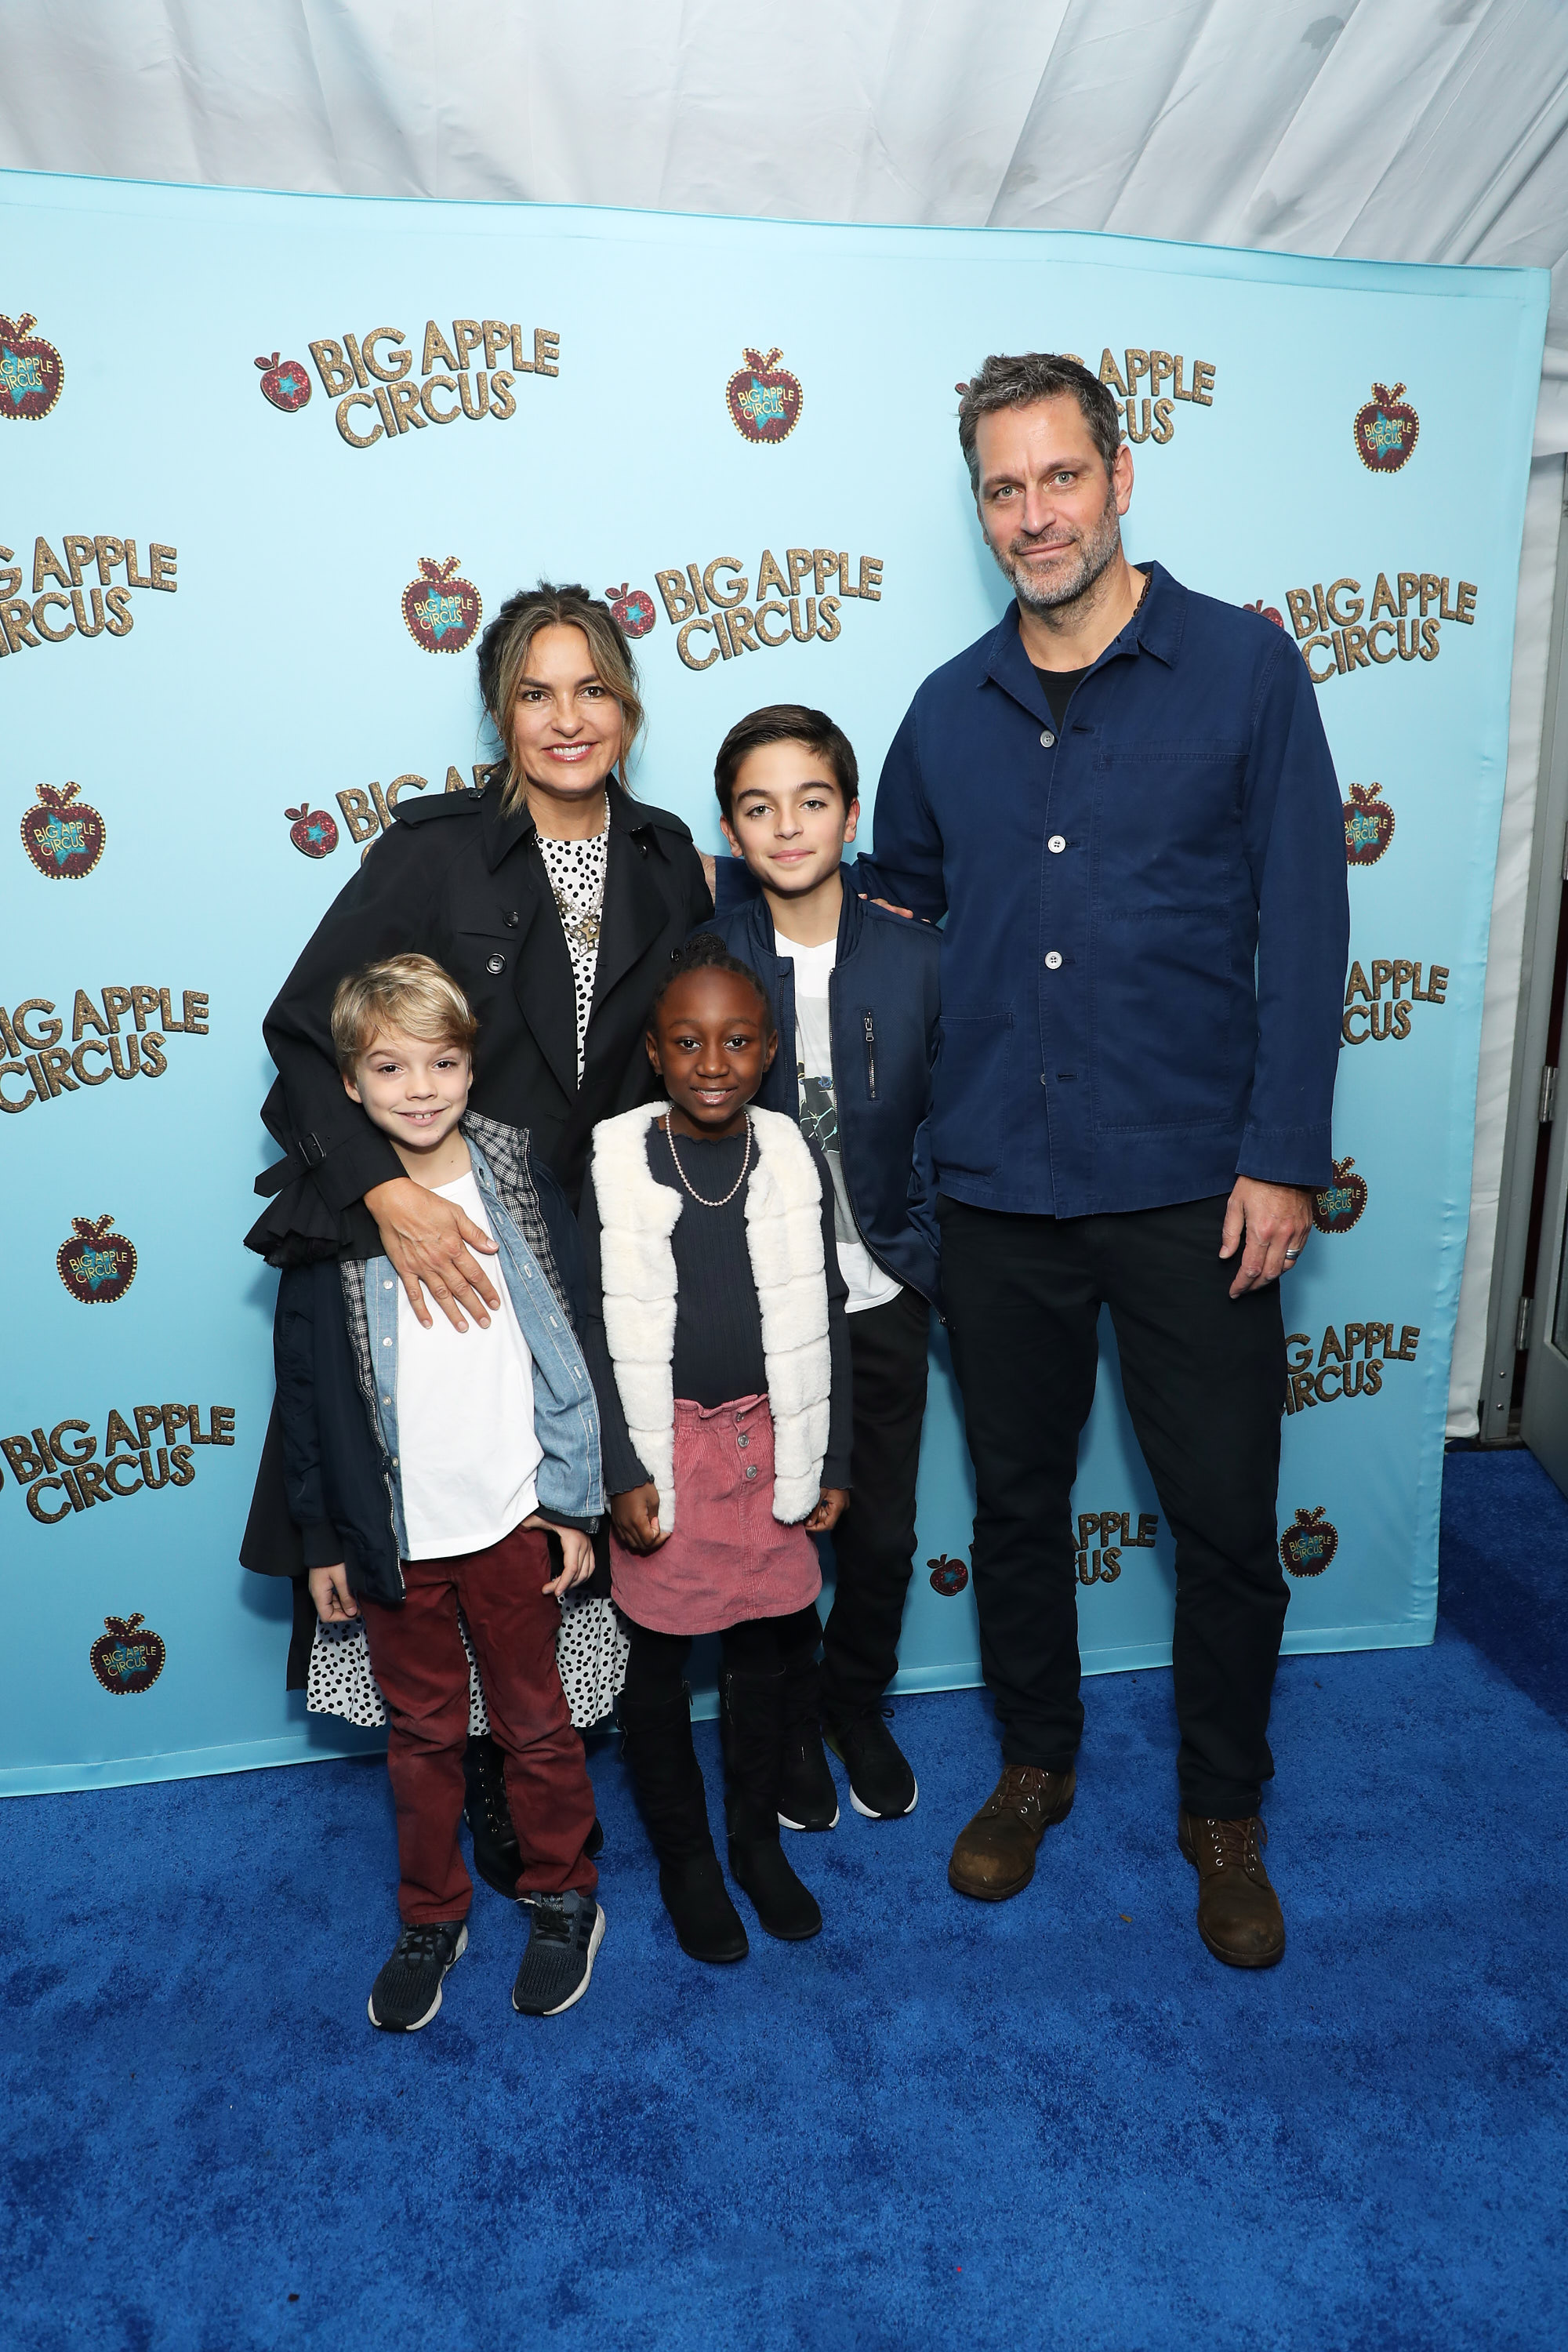 Mariska Hargitay and Peter Hermann with their kids on October 27, 2019 in New York City | Source: Getty Images